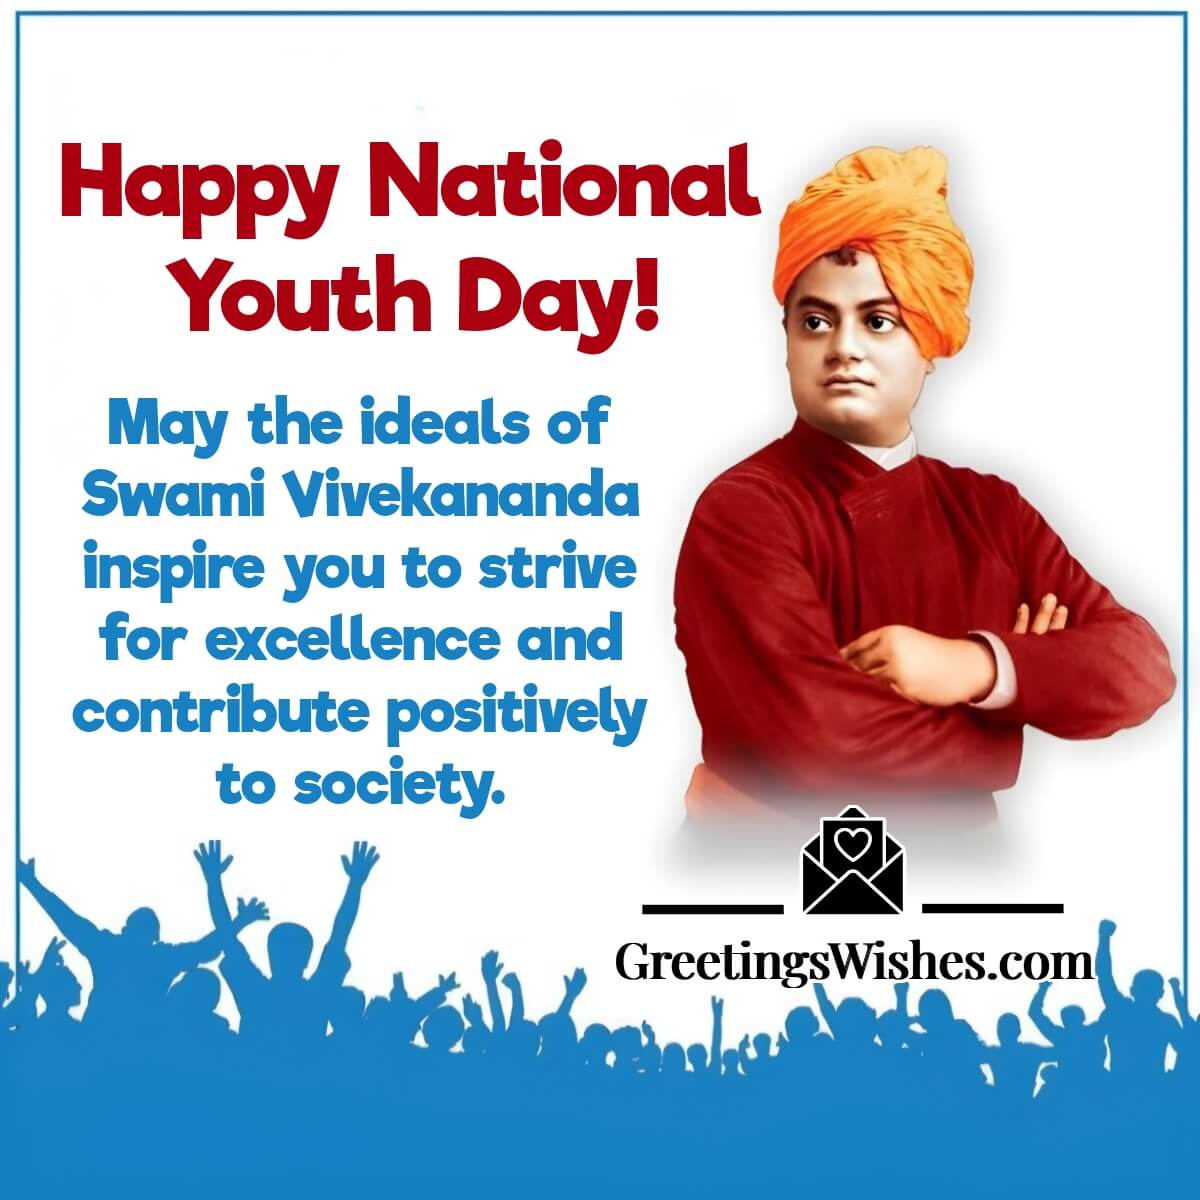 Happy National Youth Day Wishes Image